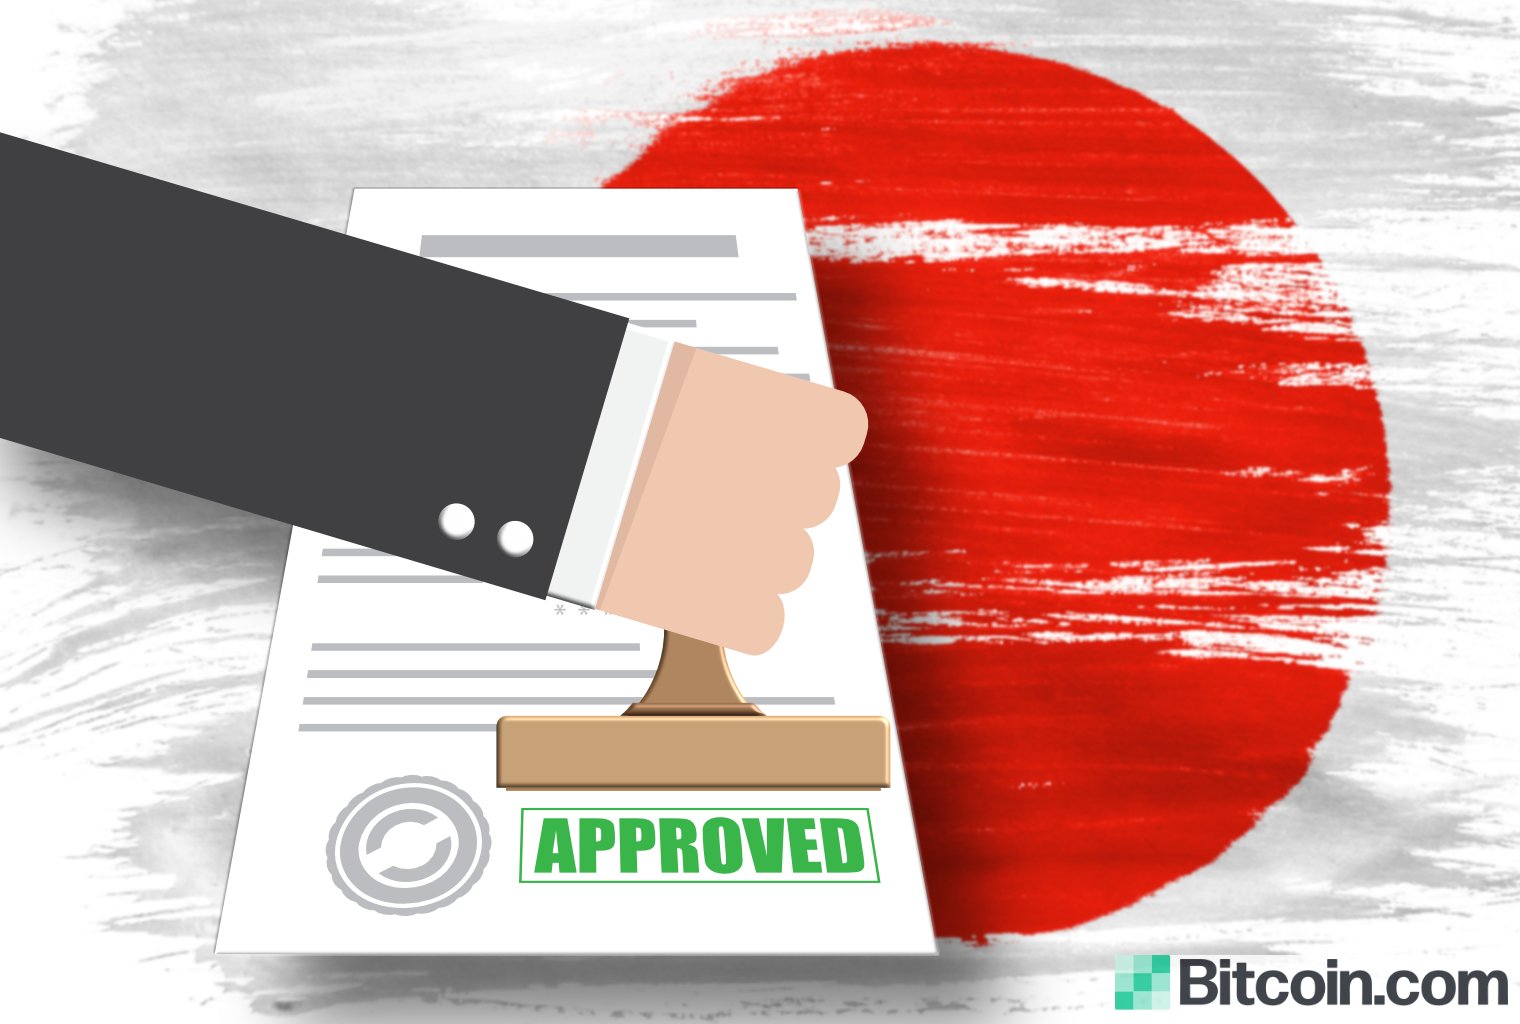 23 Approved Cryptocurrency Exchanges in Japan — Number Rises Amid Pandemic